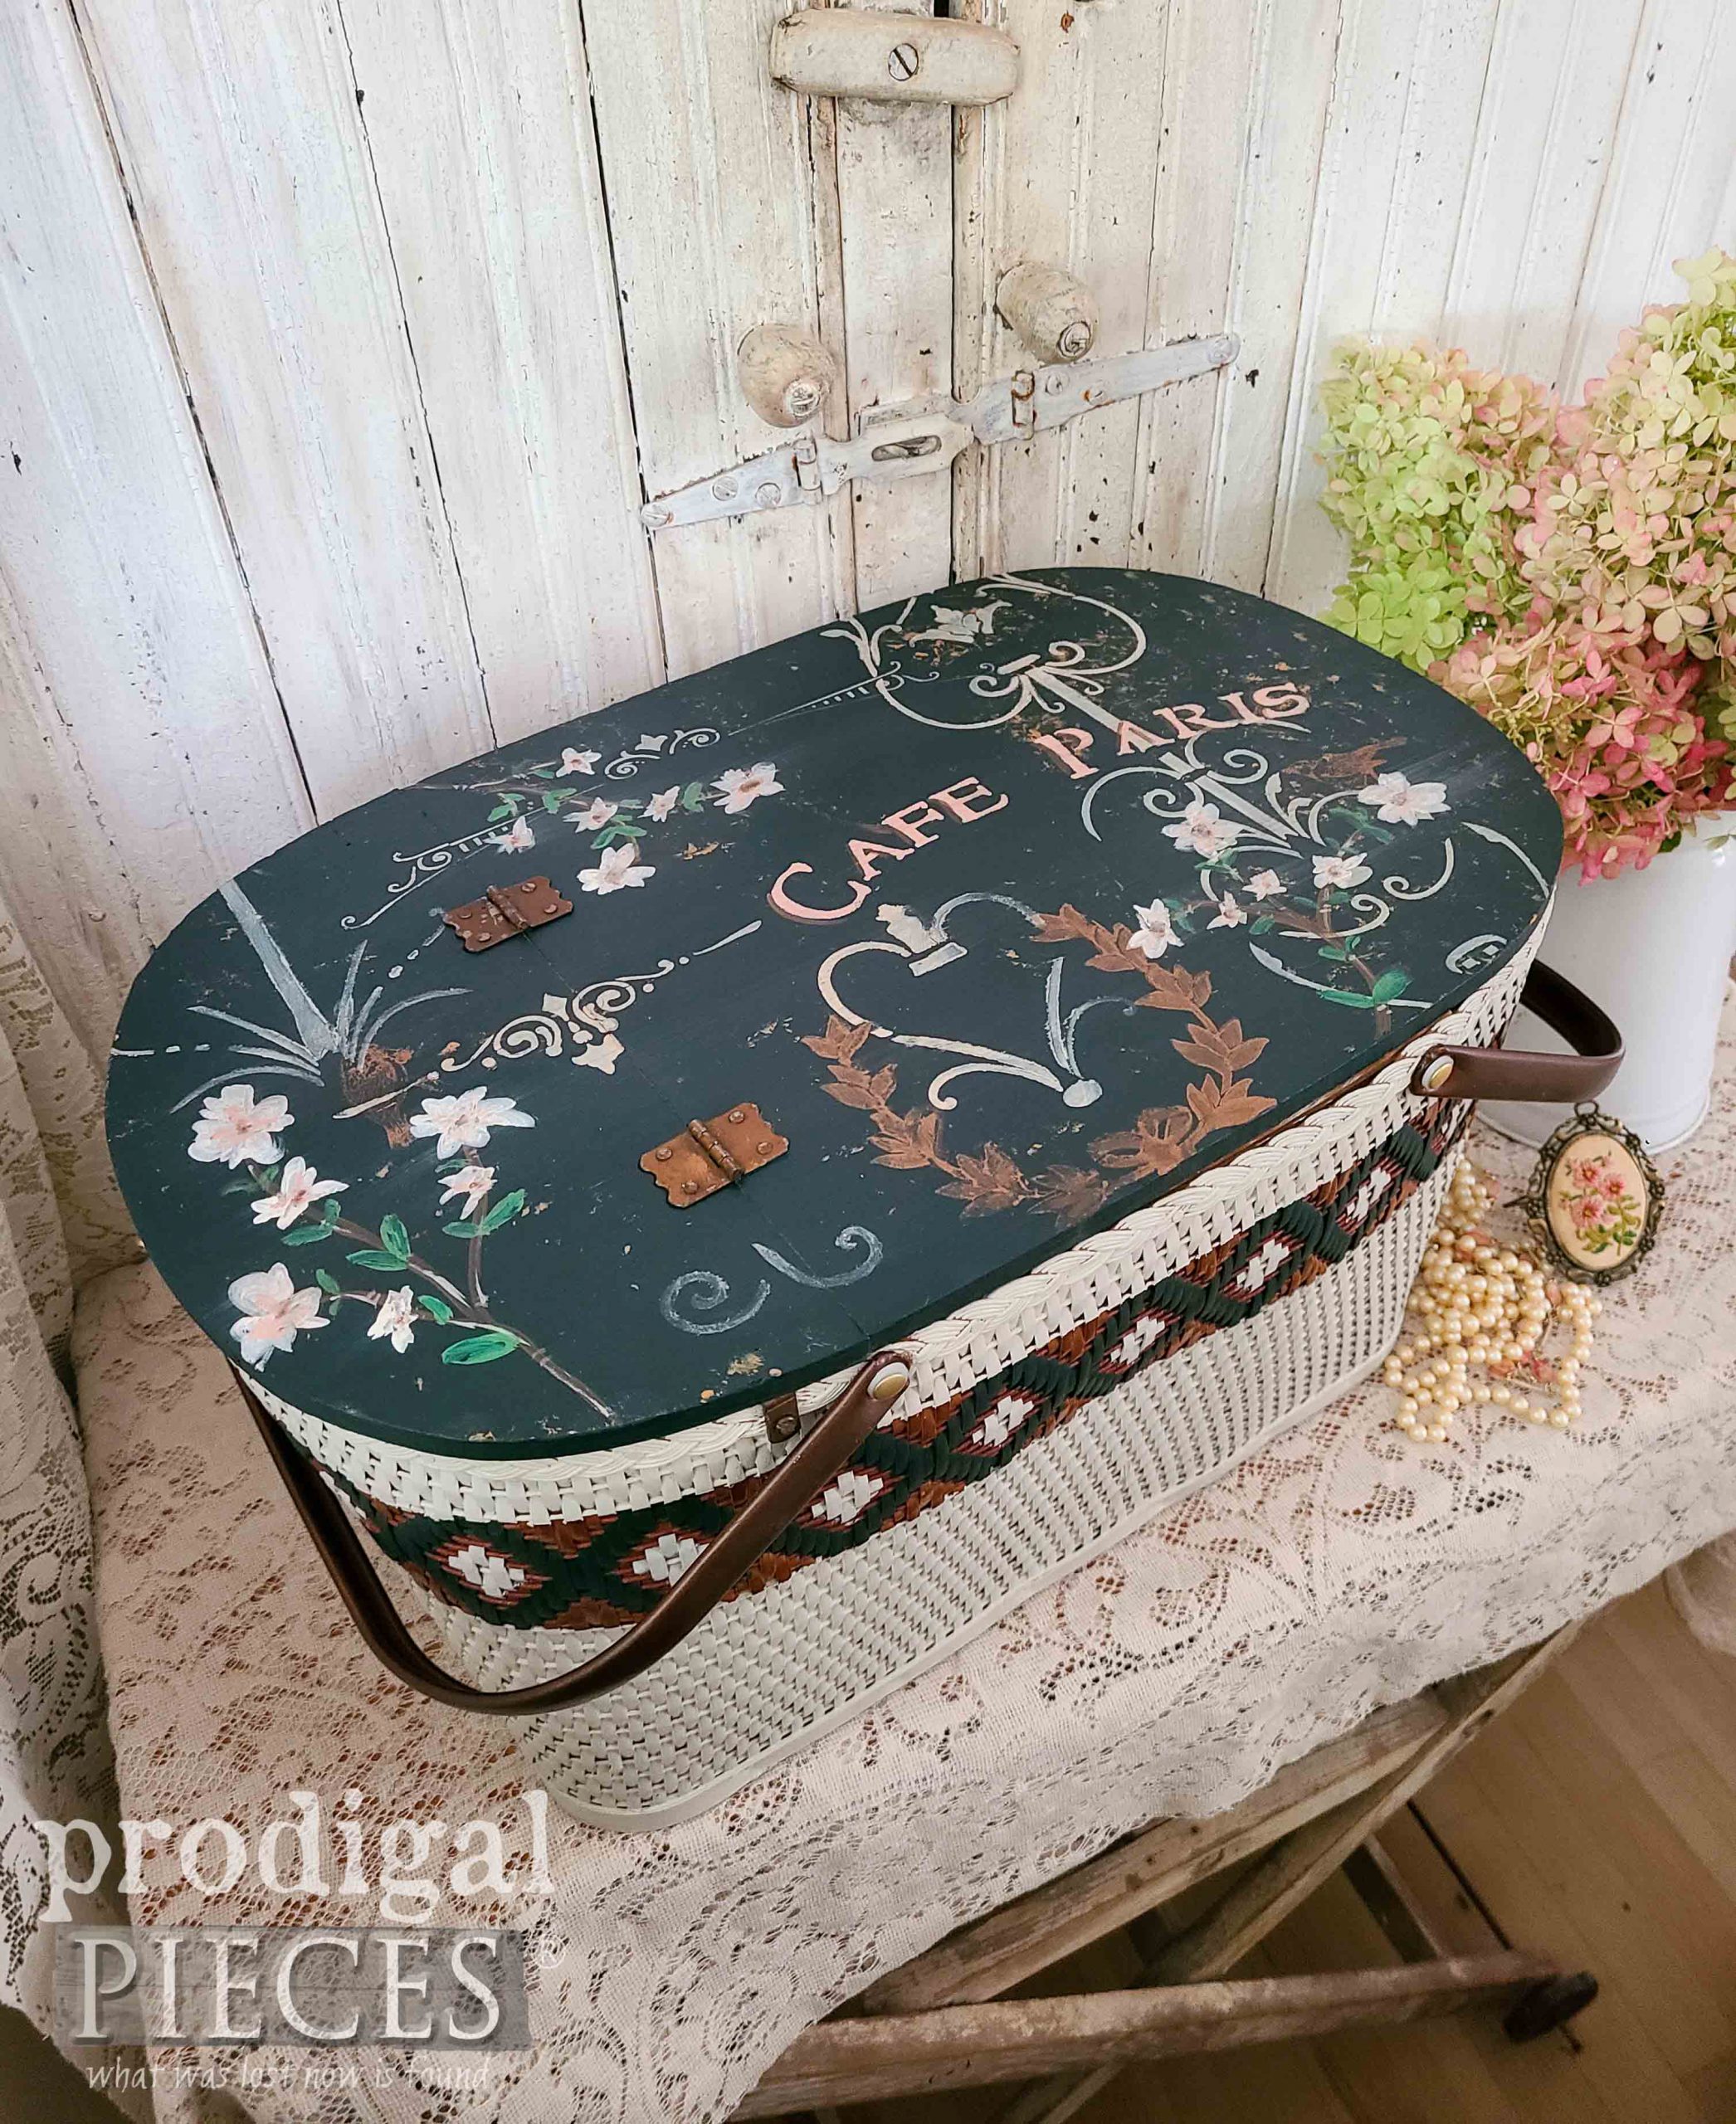 Hand-Painted and Stenciled Vintage Picnic Basket by Larissa of Prodigal Pieces | prodigalpieces.com #prodigalpieces #art #vintage #picnic #farmhouse